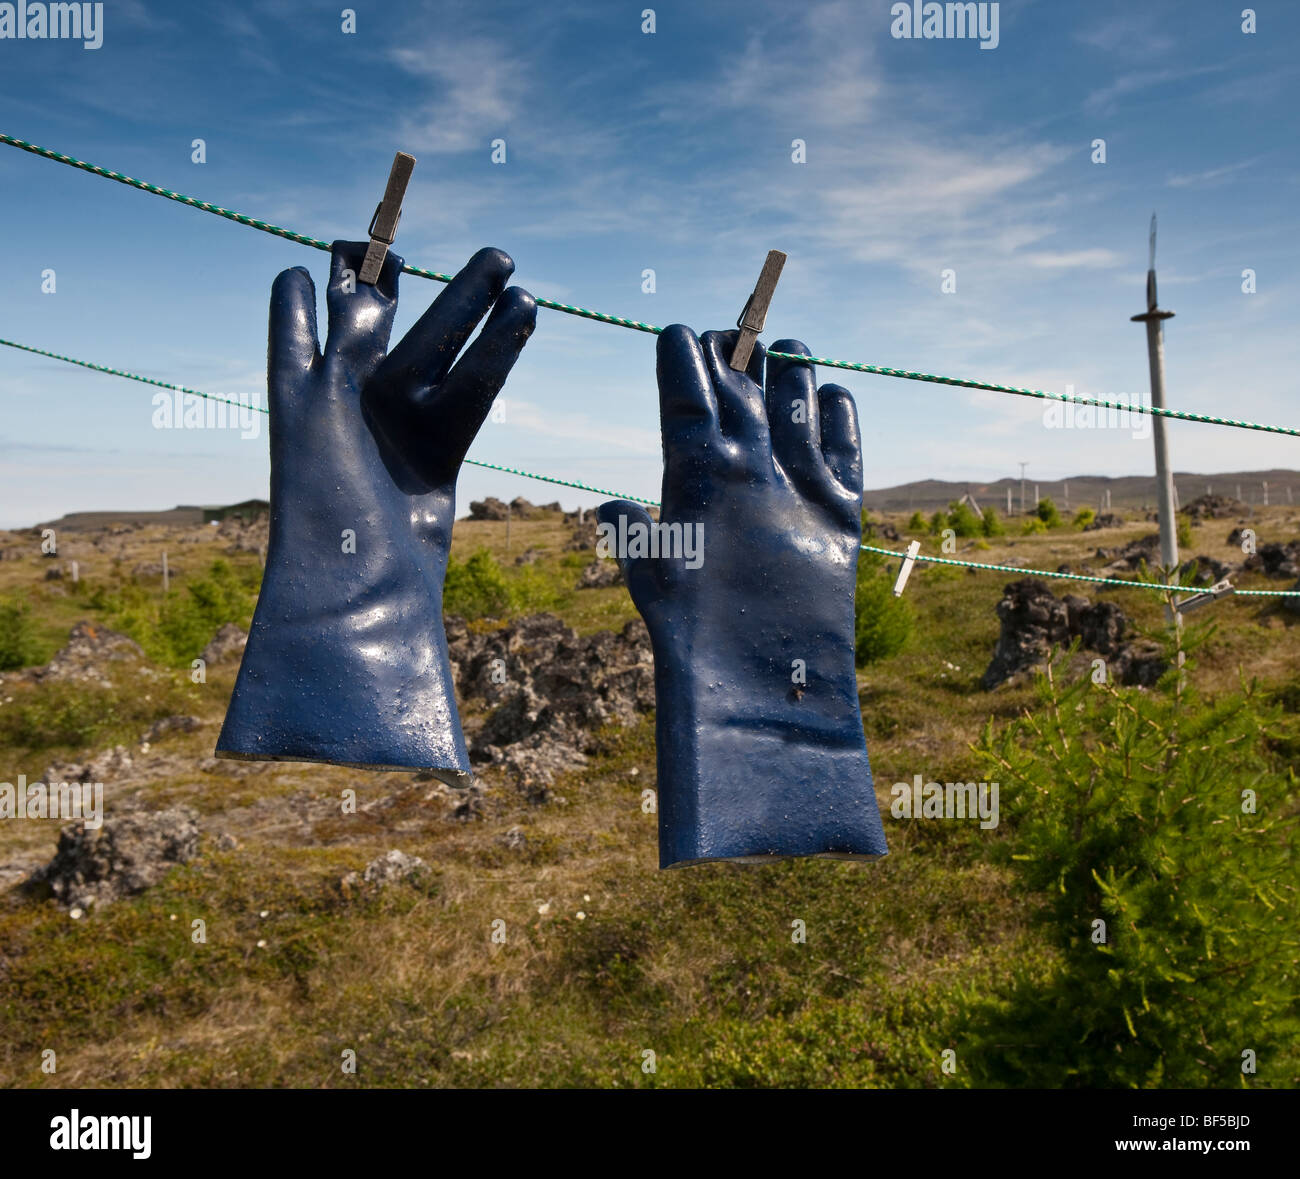 Rubber gloves drying, Iceland Stock Photo